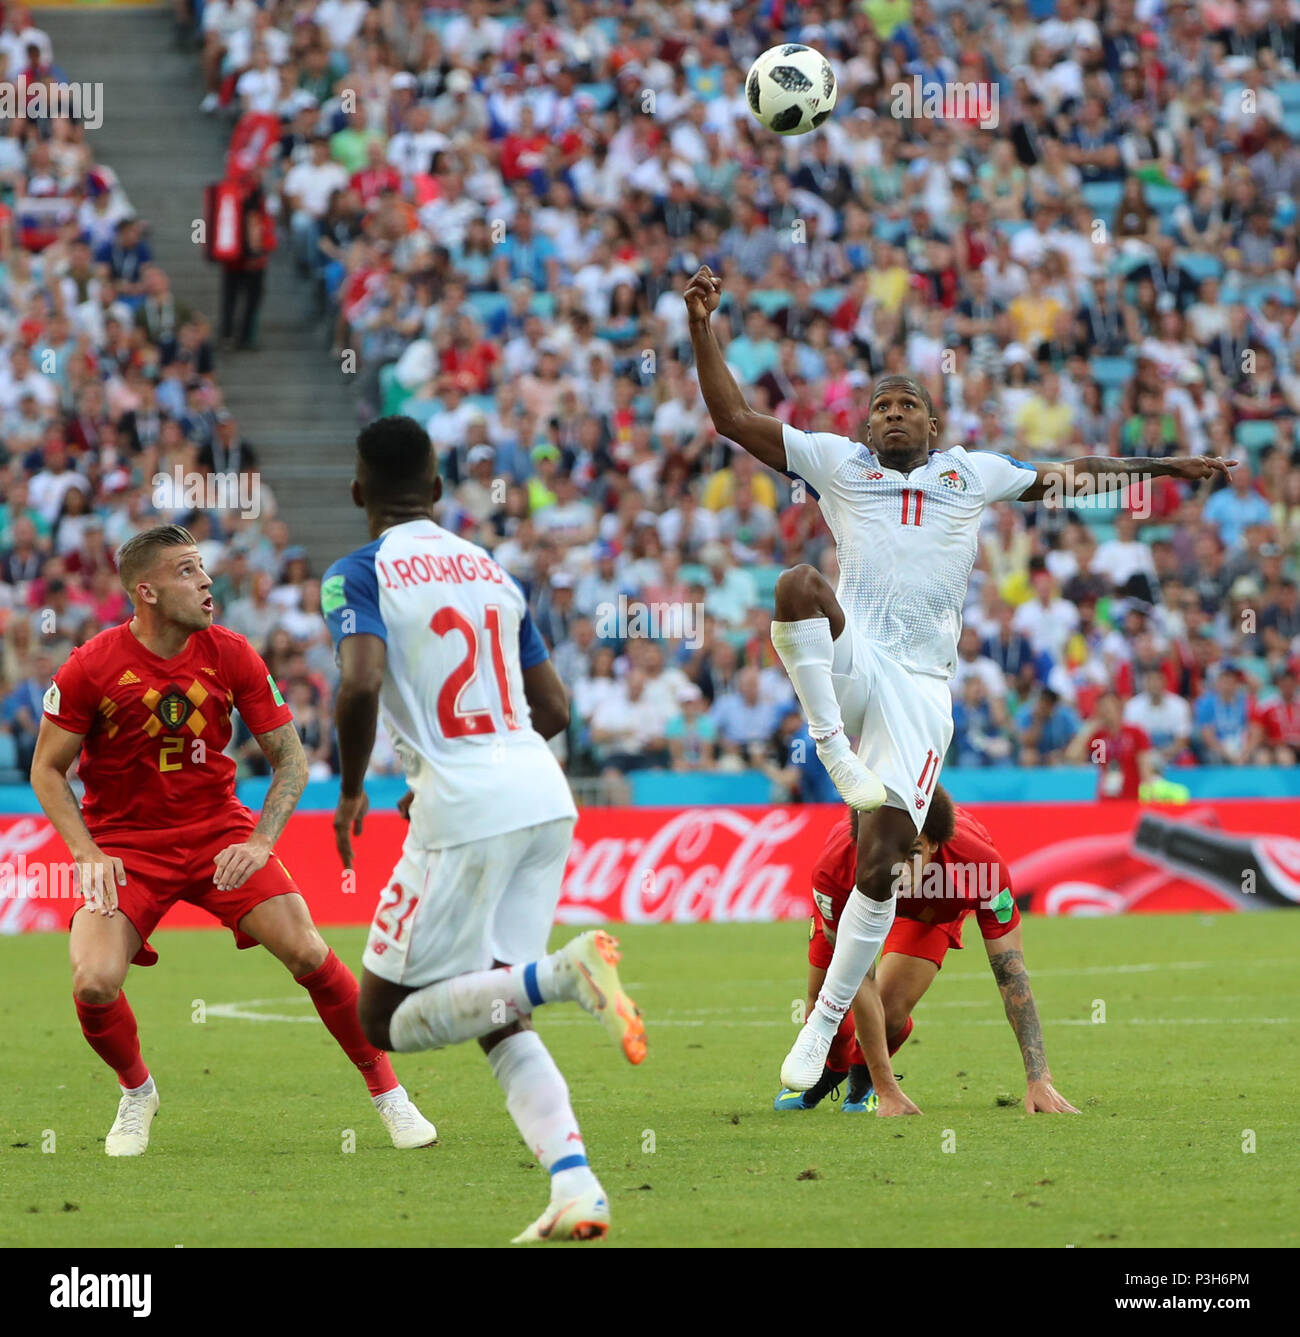 Sochi, Russia. 18th June, 2018. Armando Cooper (R top) of Panama competes during a group G match between Belgium and Panama at the 2018 FIFA World Cup in Sochi, Russia, June 18, 2018. Credit: Bai Xueqi/Xinhua/Alamy Live News Stock Photo